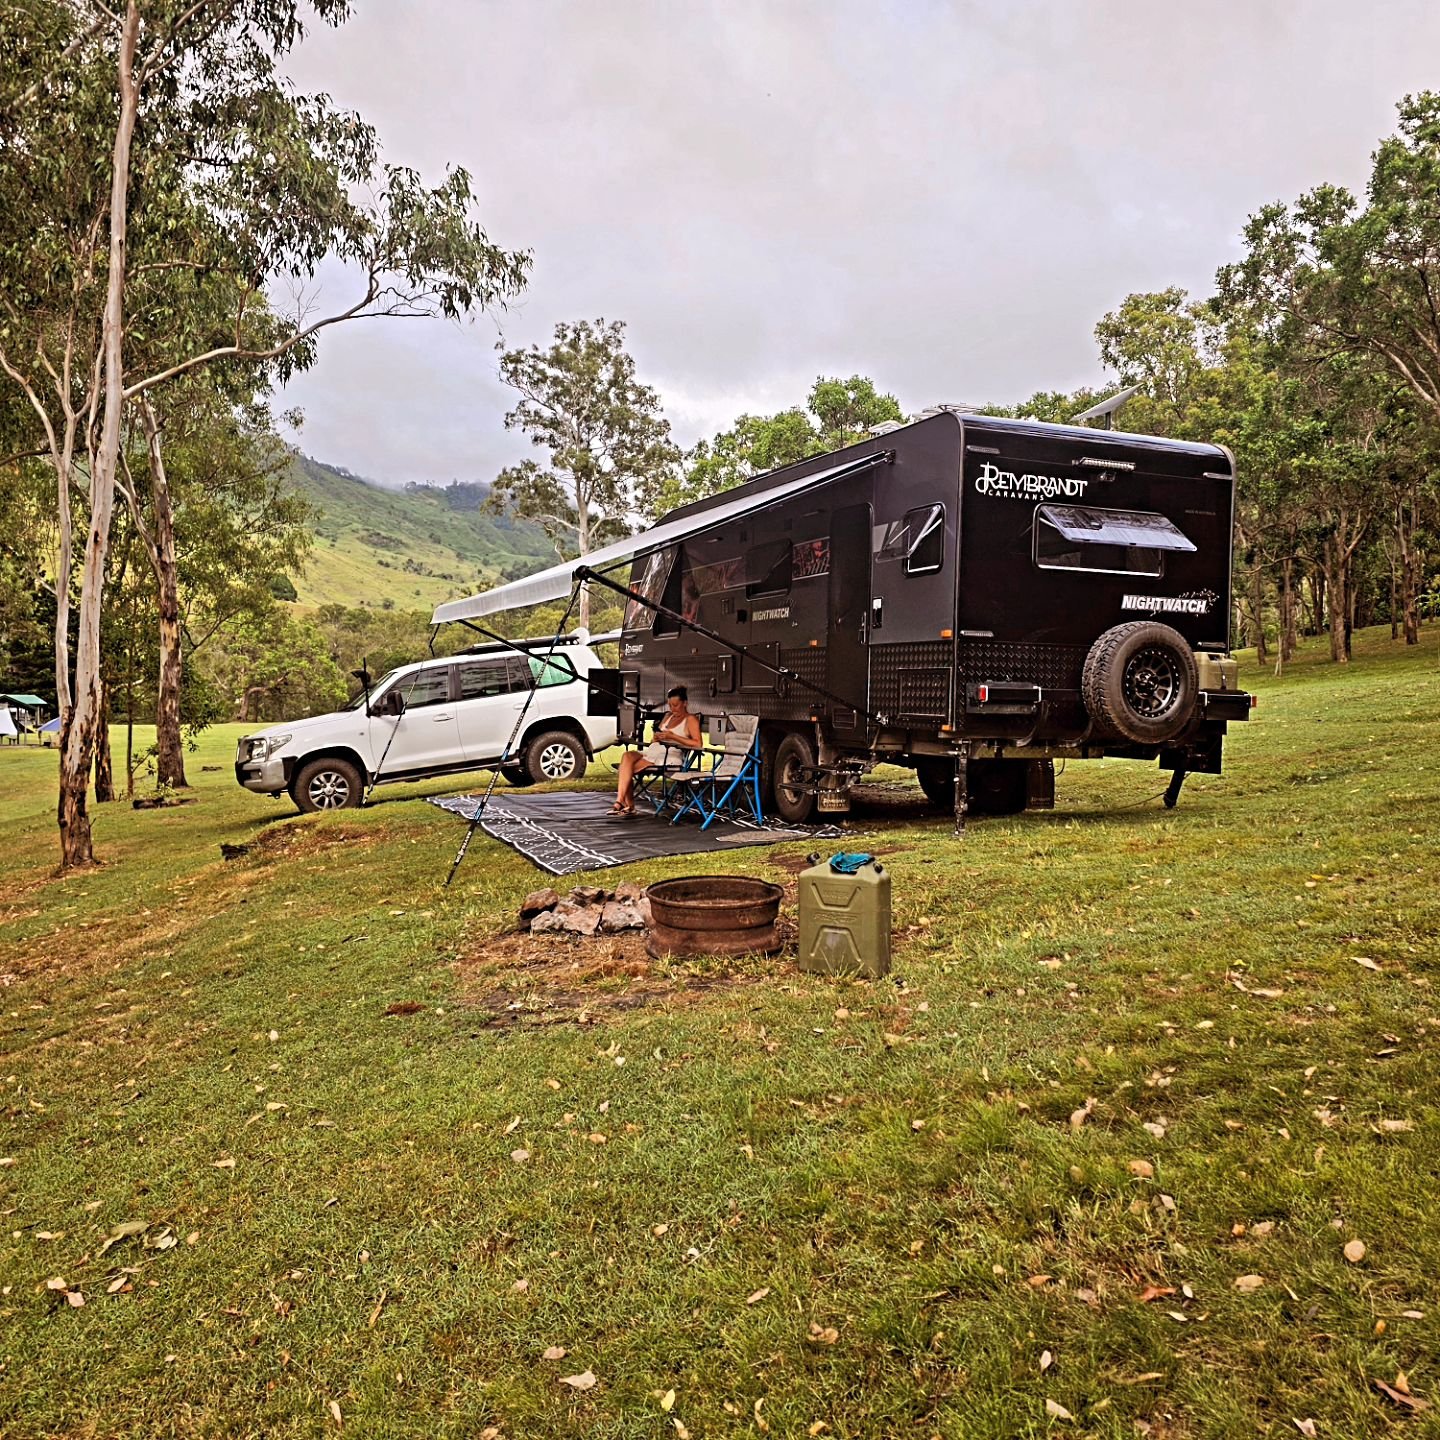 Did you get away over the weekend? 

What type of camping do you like to do? 

Beach, Bush, or Caravan parks?

Let us know 👇
.
.
#camping 
#caravanlife 
#caravanlifeaustralia 
#rembrandtcaravans 
#offgridcamping 
#caravanpark 
#beachcamping